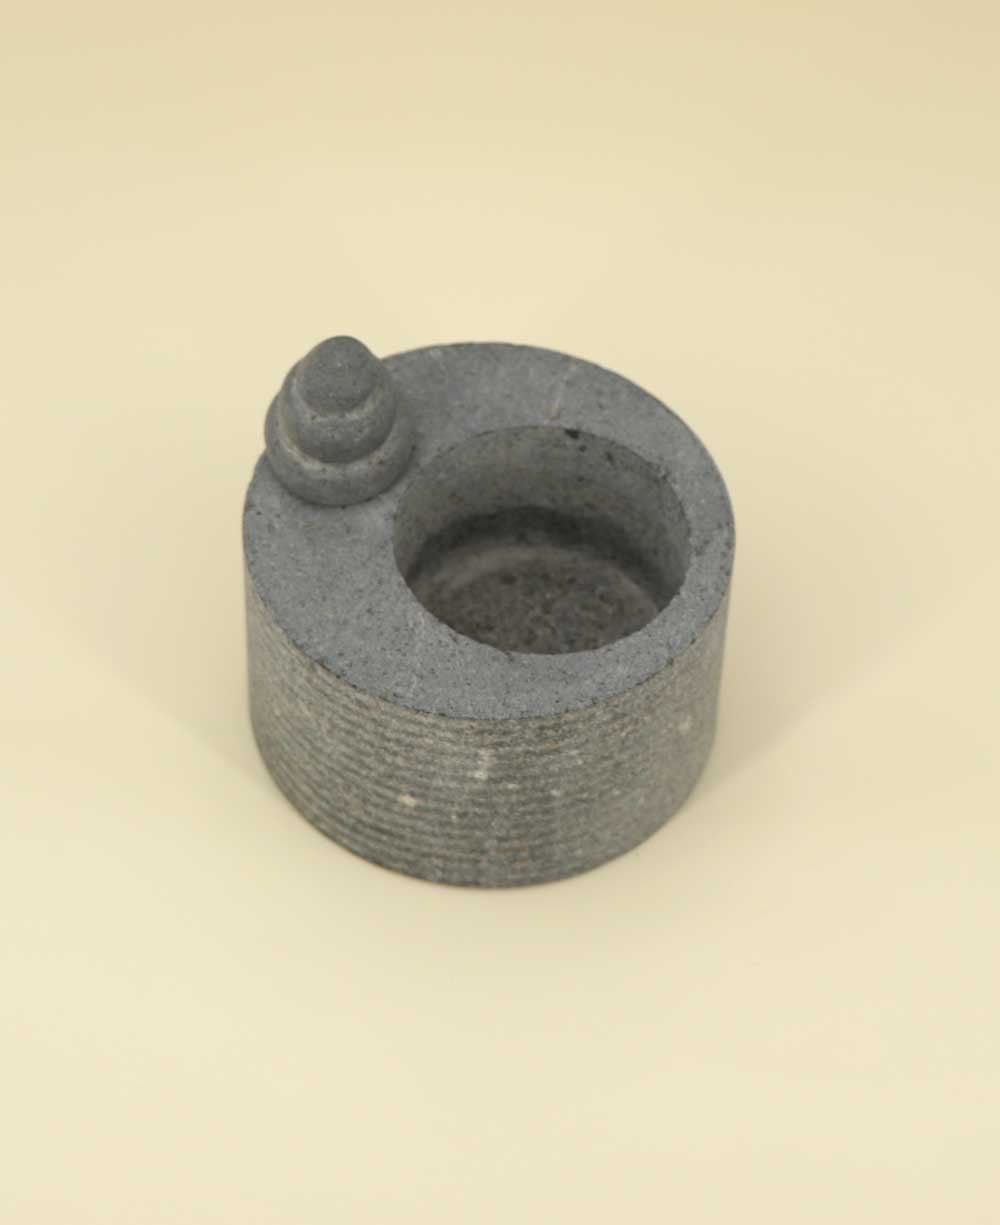 Small Cairn Rock Candle or Succulent Desktop Holder - Candle Holders